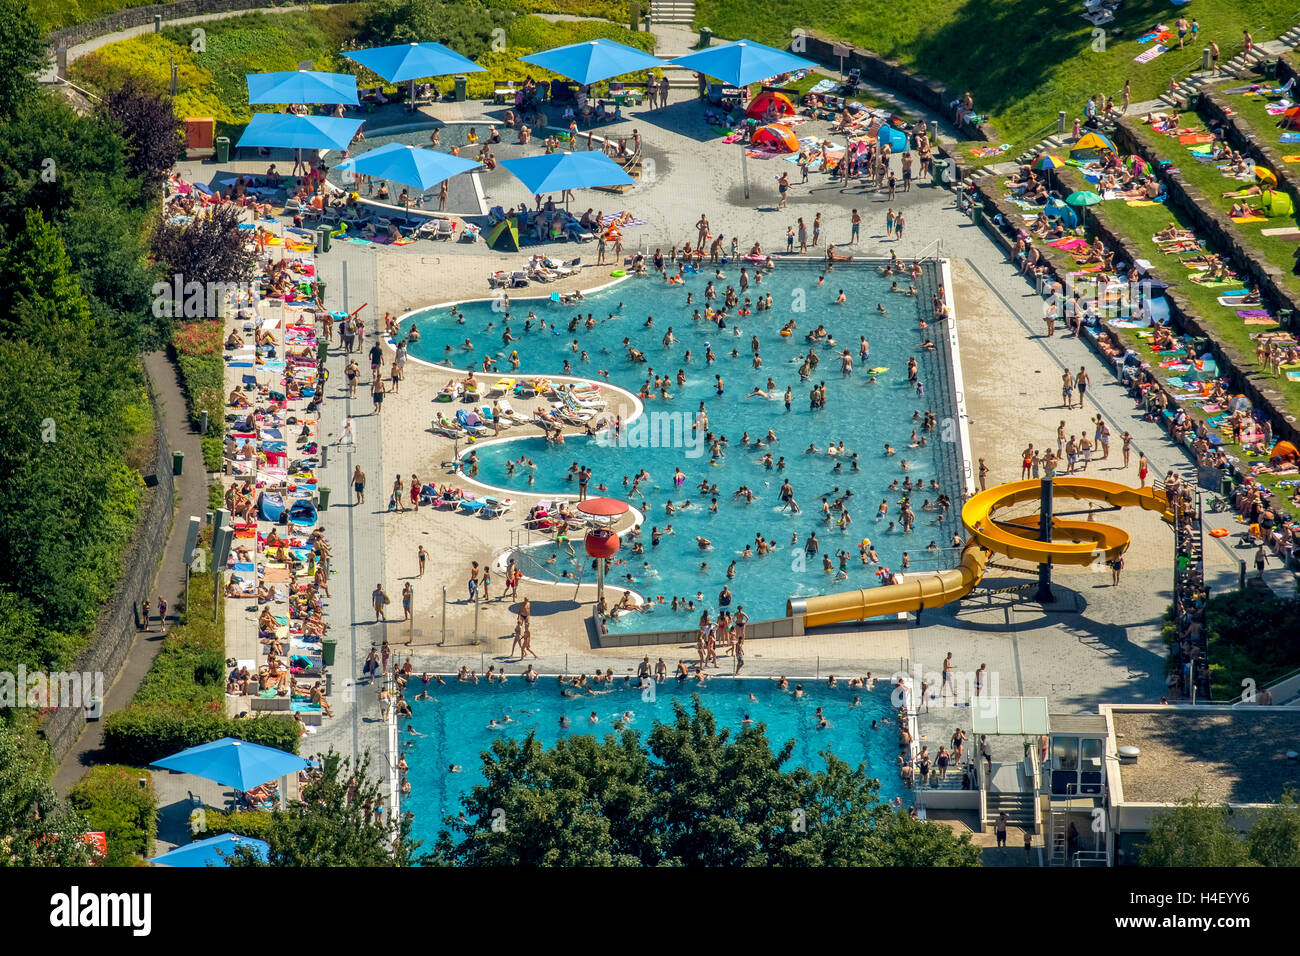 Aerial view, pool, swimmer pool with a wavy margin, Bathers in outdoor pool Annen, Witten, Ruhr district, North Rhine-Westphalia Stock Photo